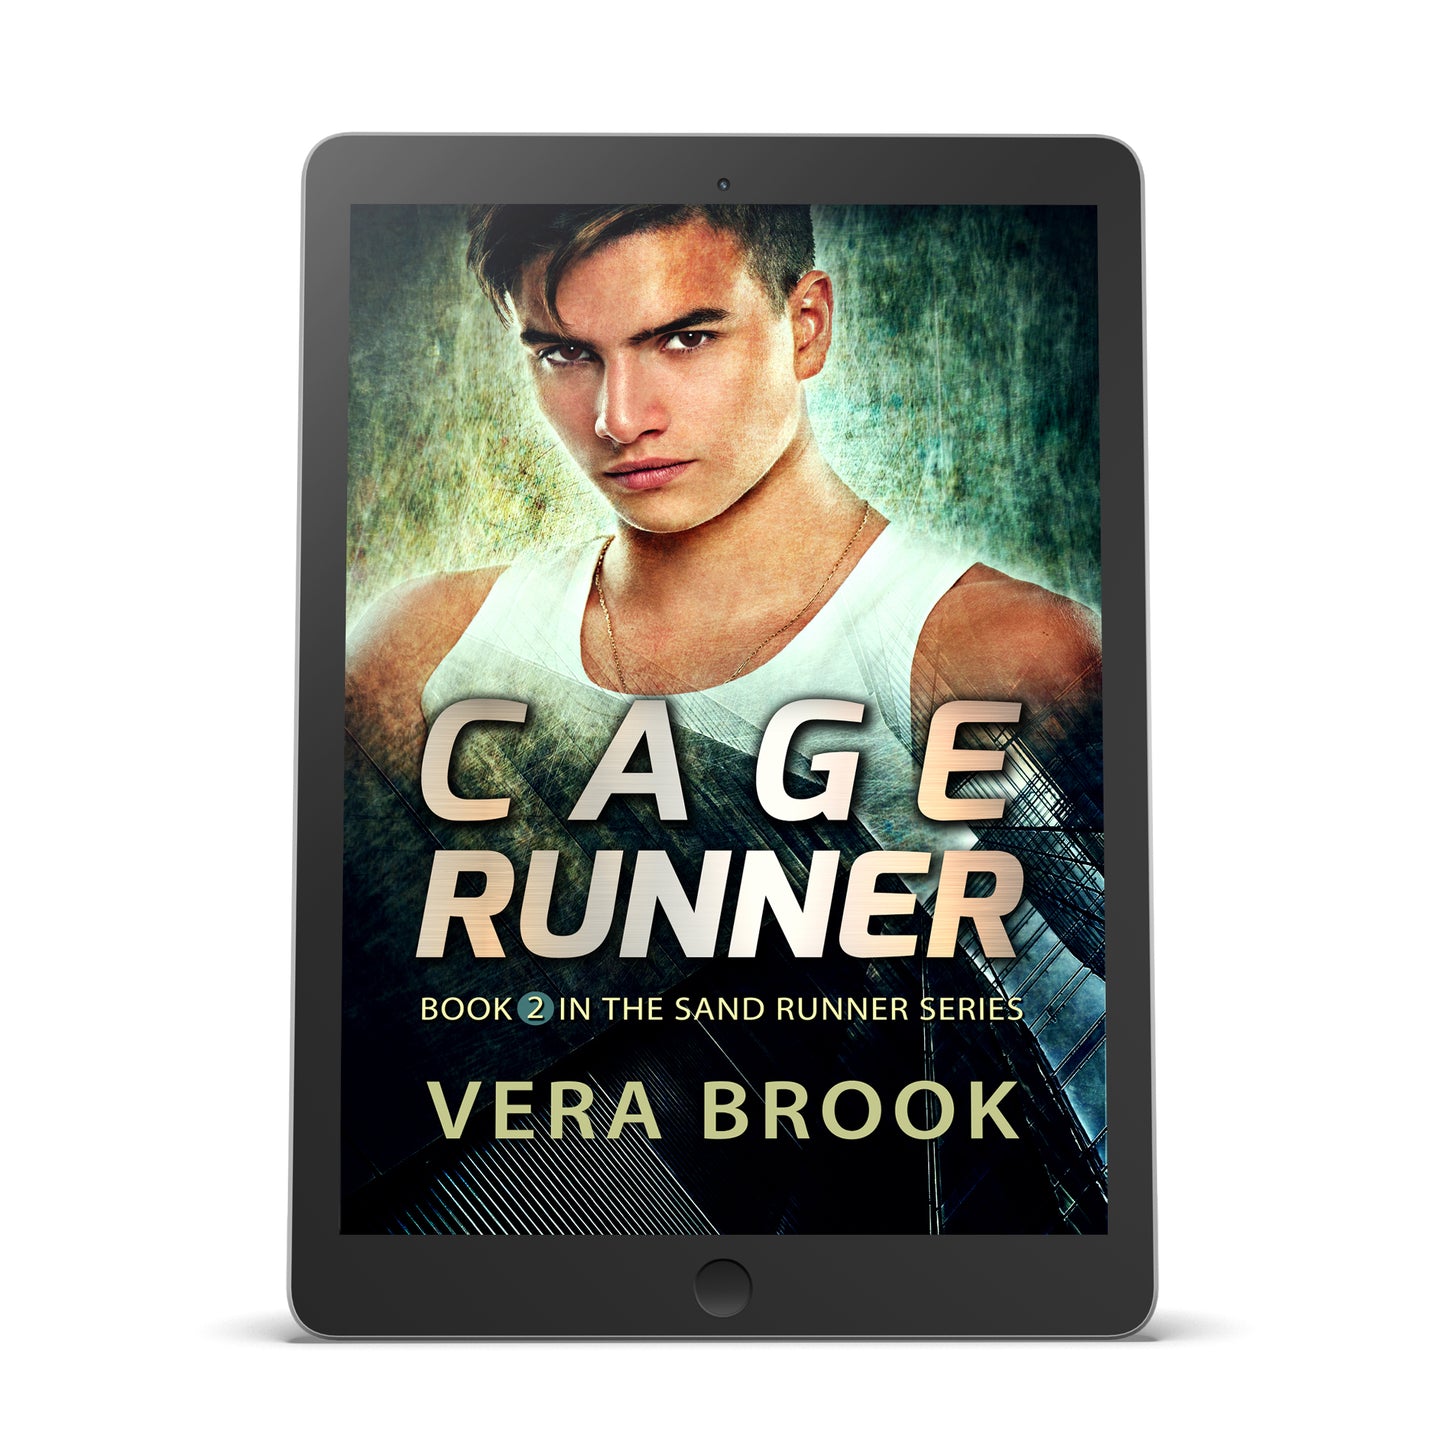 Ebook cover of CAGE RUNNER, a dystopian YA novel by Vera Brook. The cover shows an athletic, handsome, determined young man superimposed on an ominous-looking skyscraper and wire barrier, in dark greens and grays. The title is in block metallic letters.